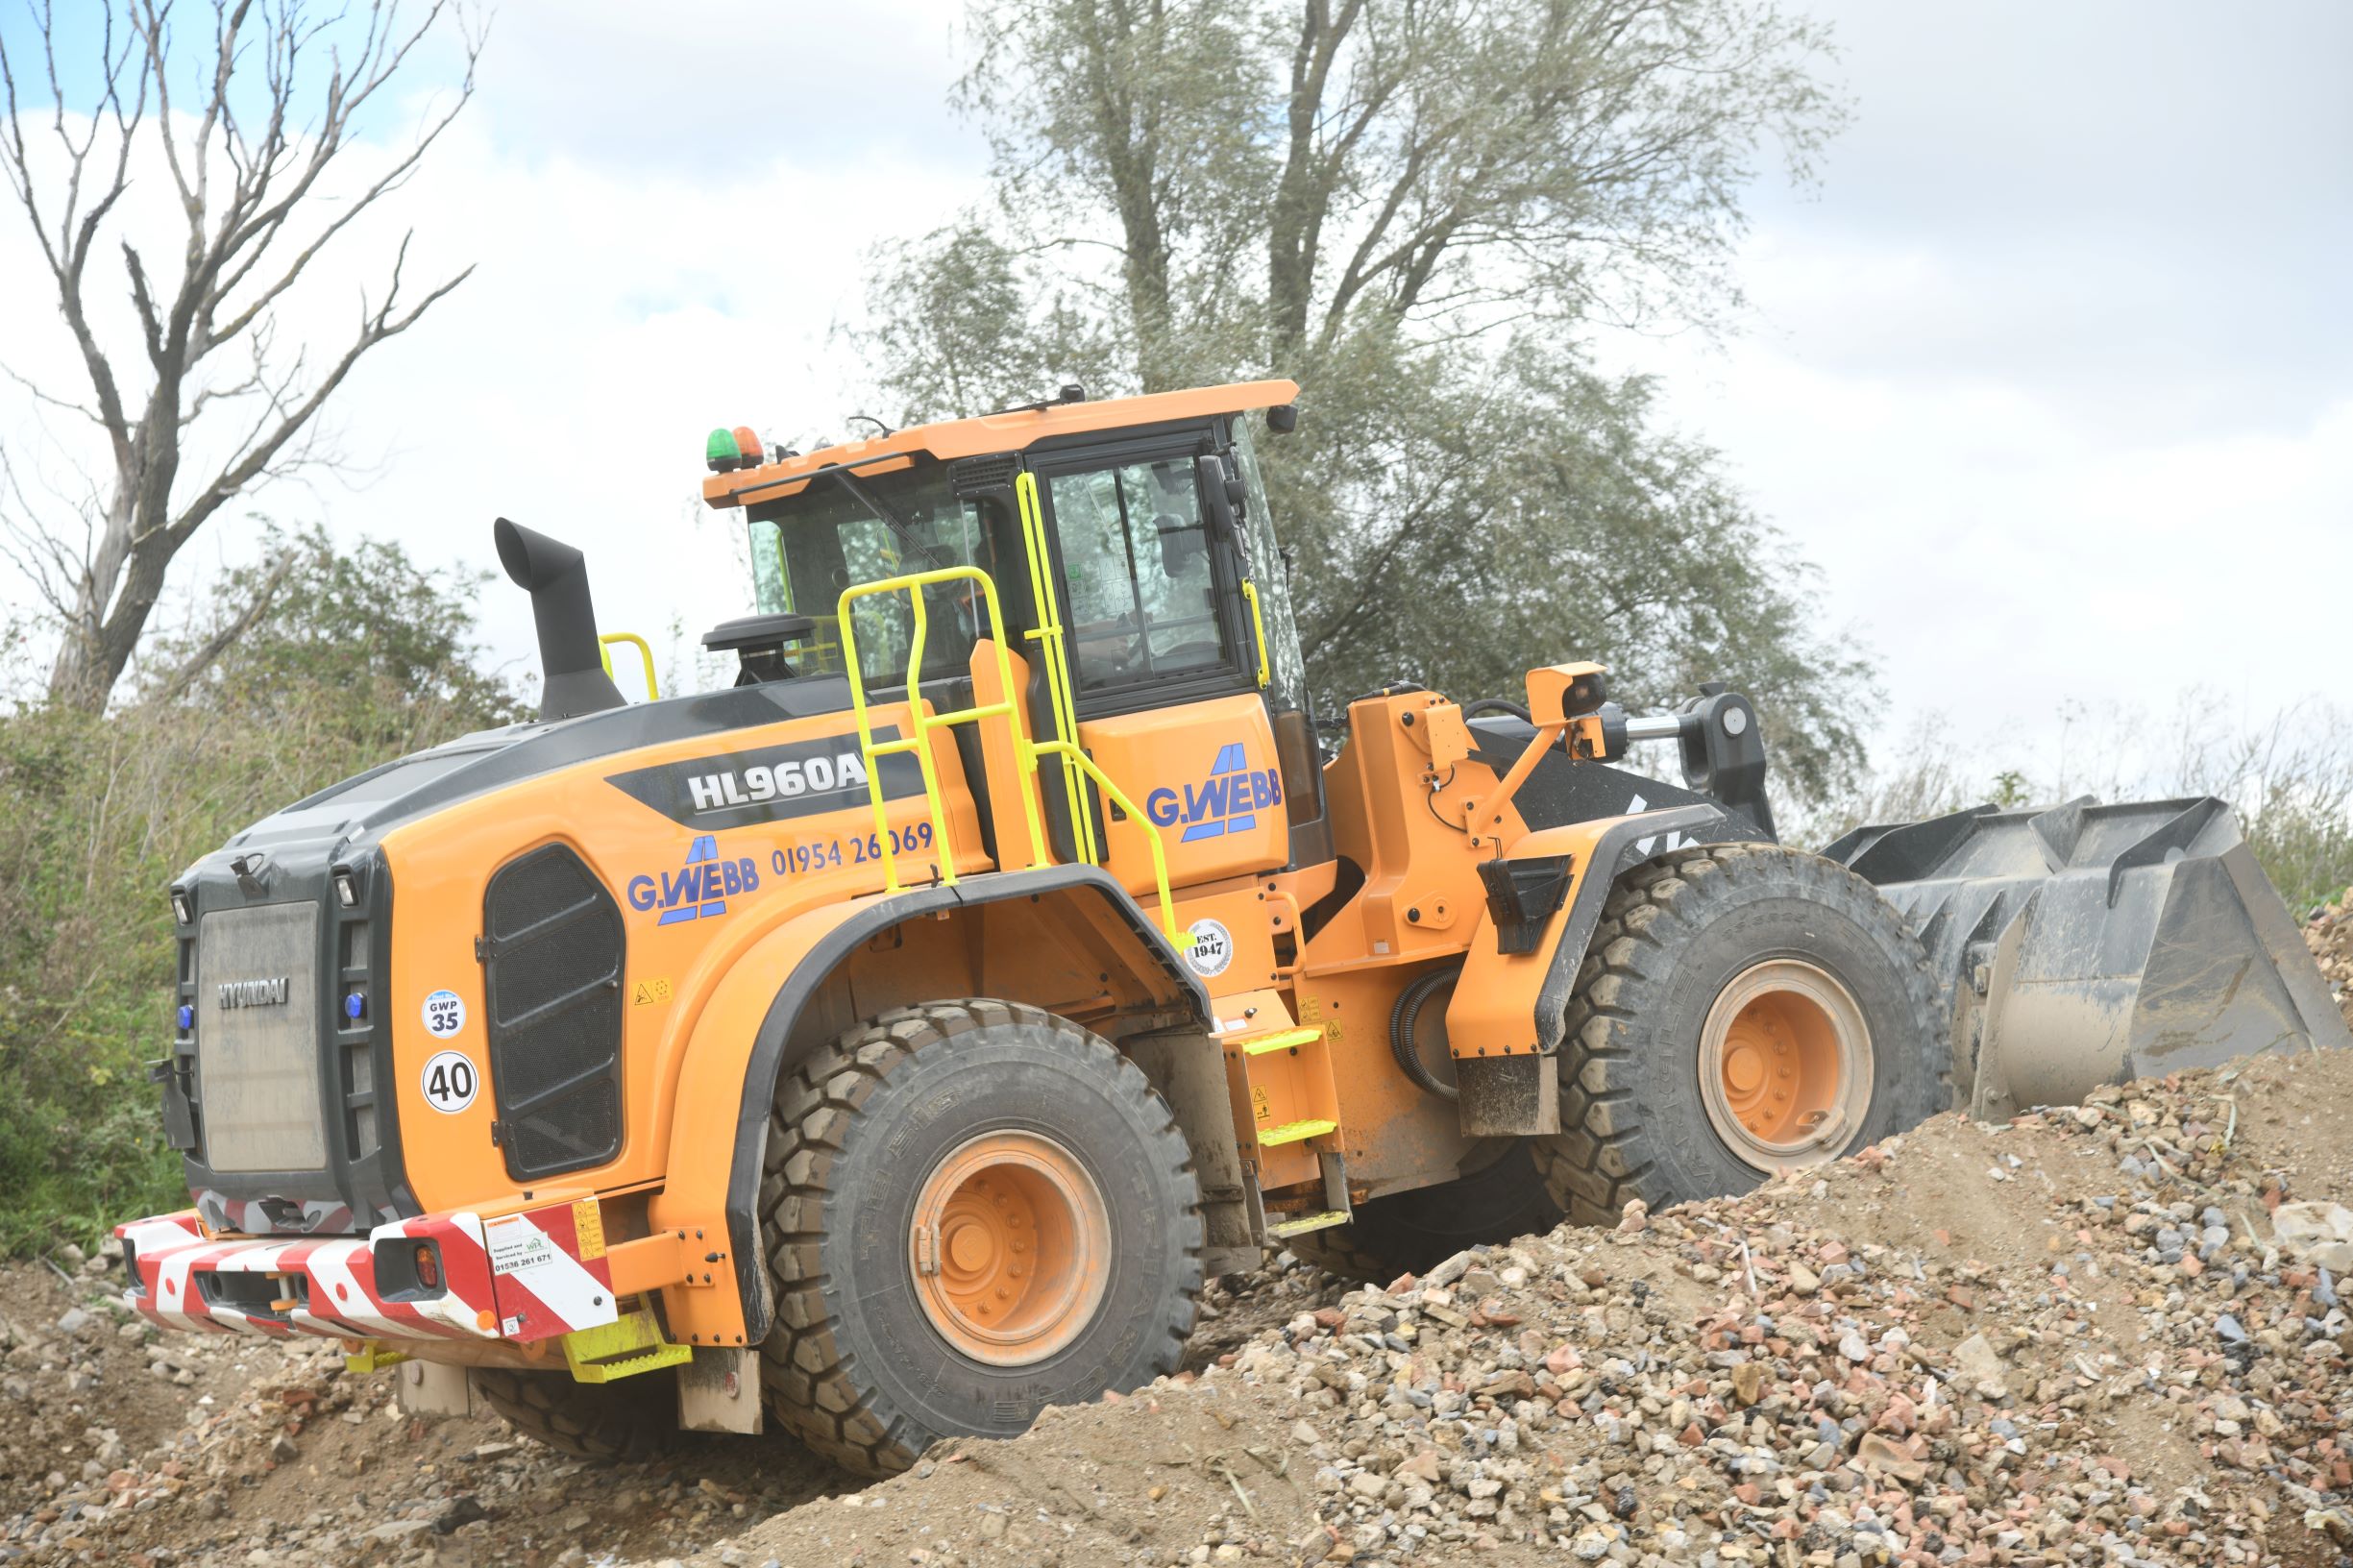  G Webb Haulage's new Hyundai HL960A wheeled loader in operation at Little Paxton quarry